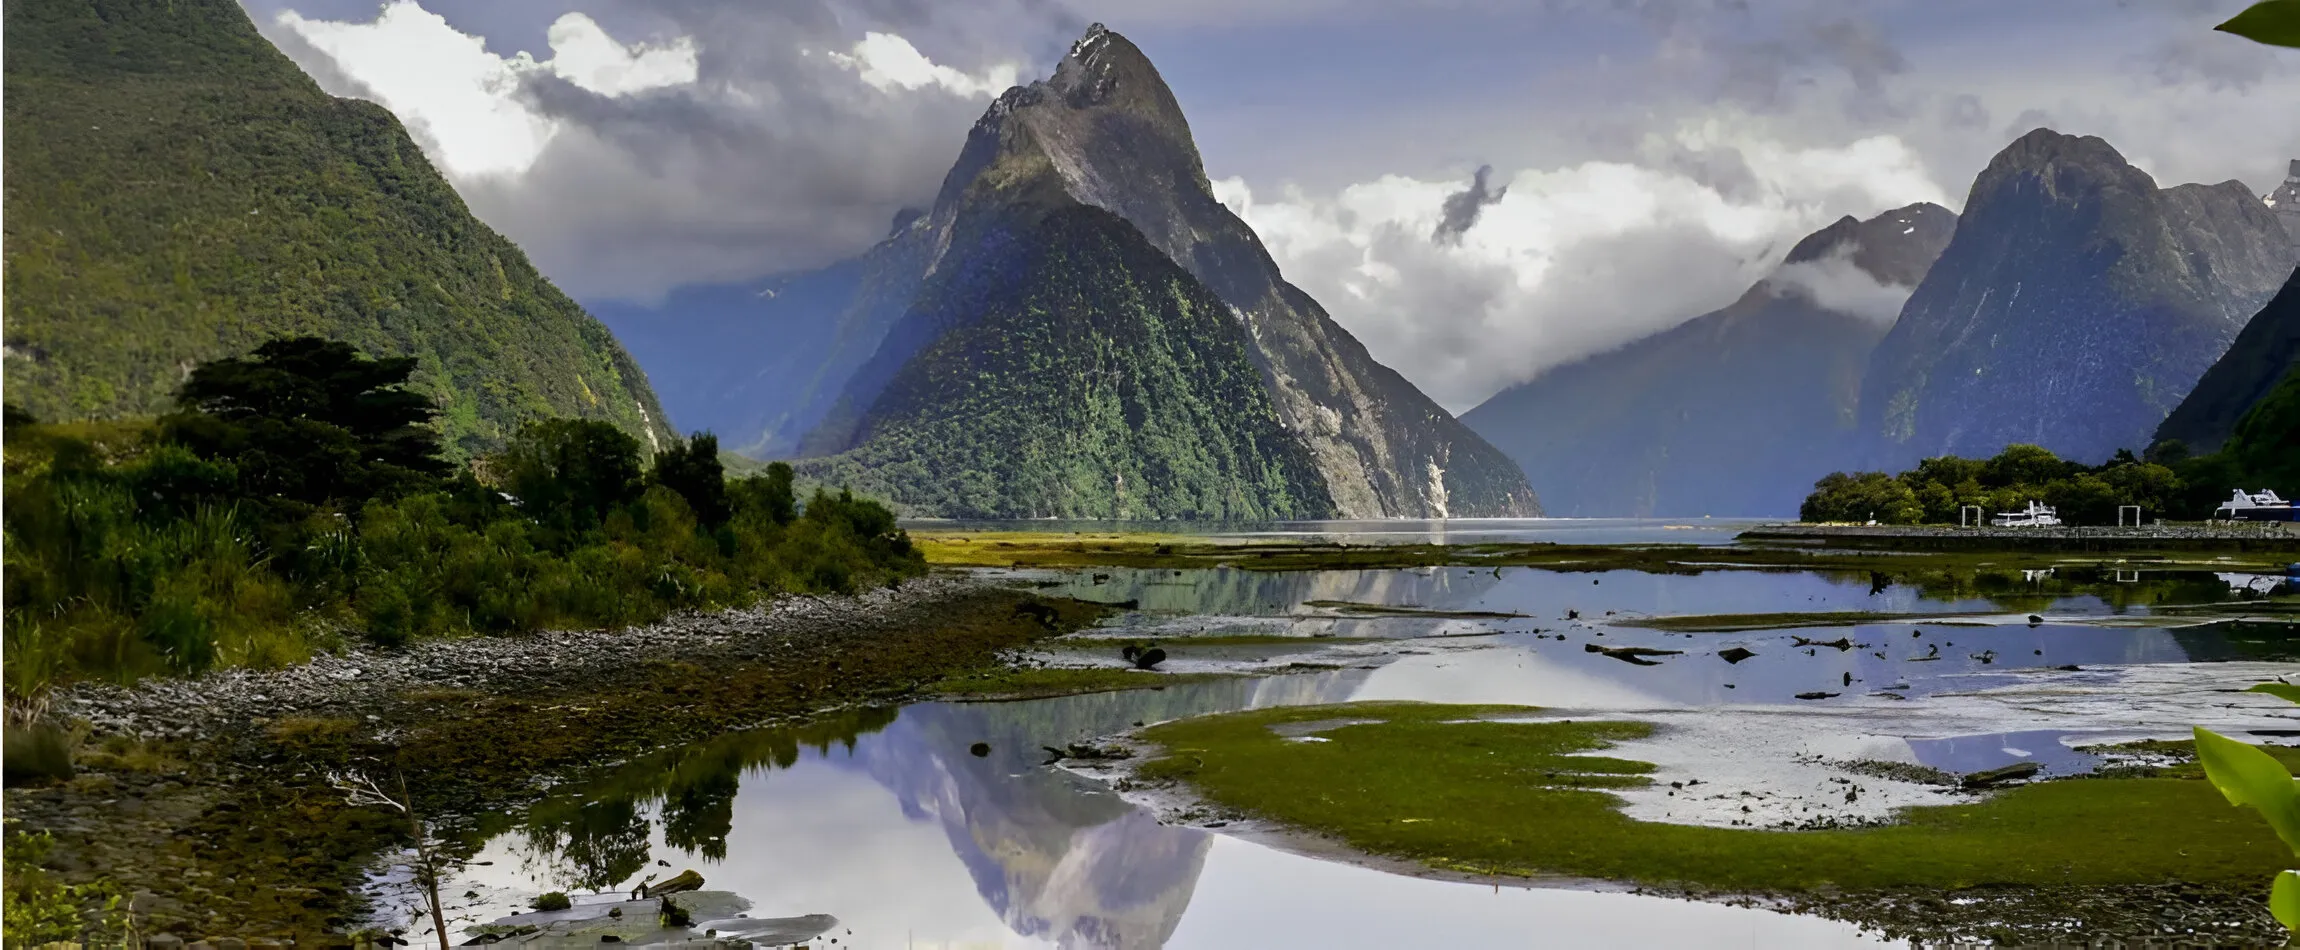 Fiordland National Park - New Zealand Tourist Attractions